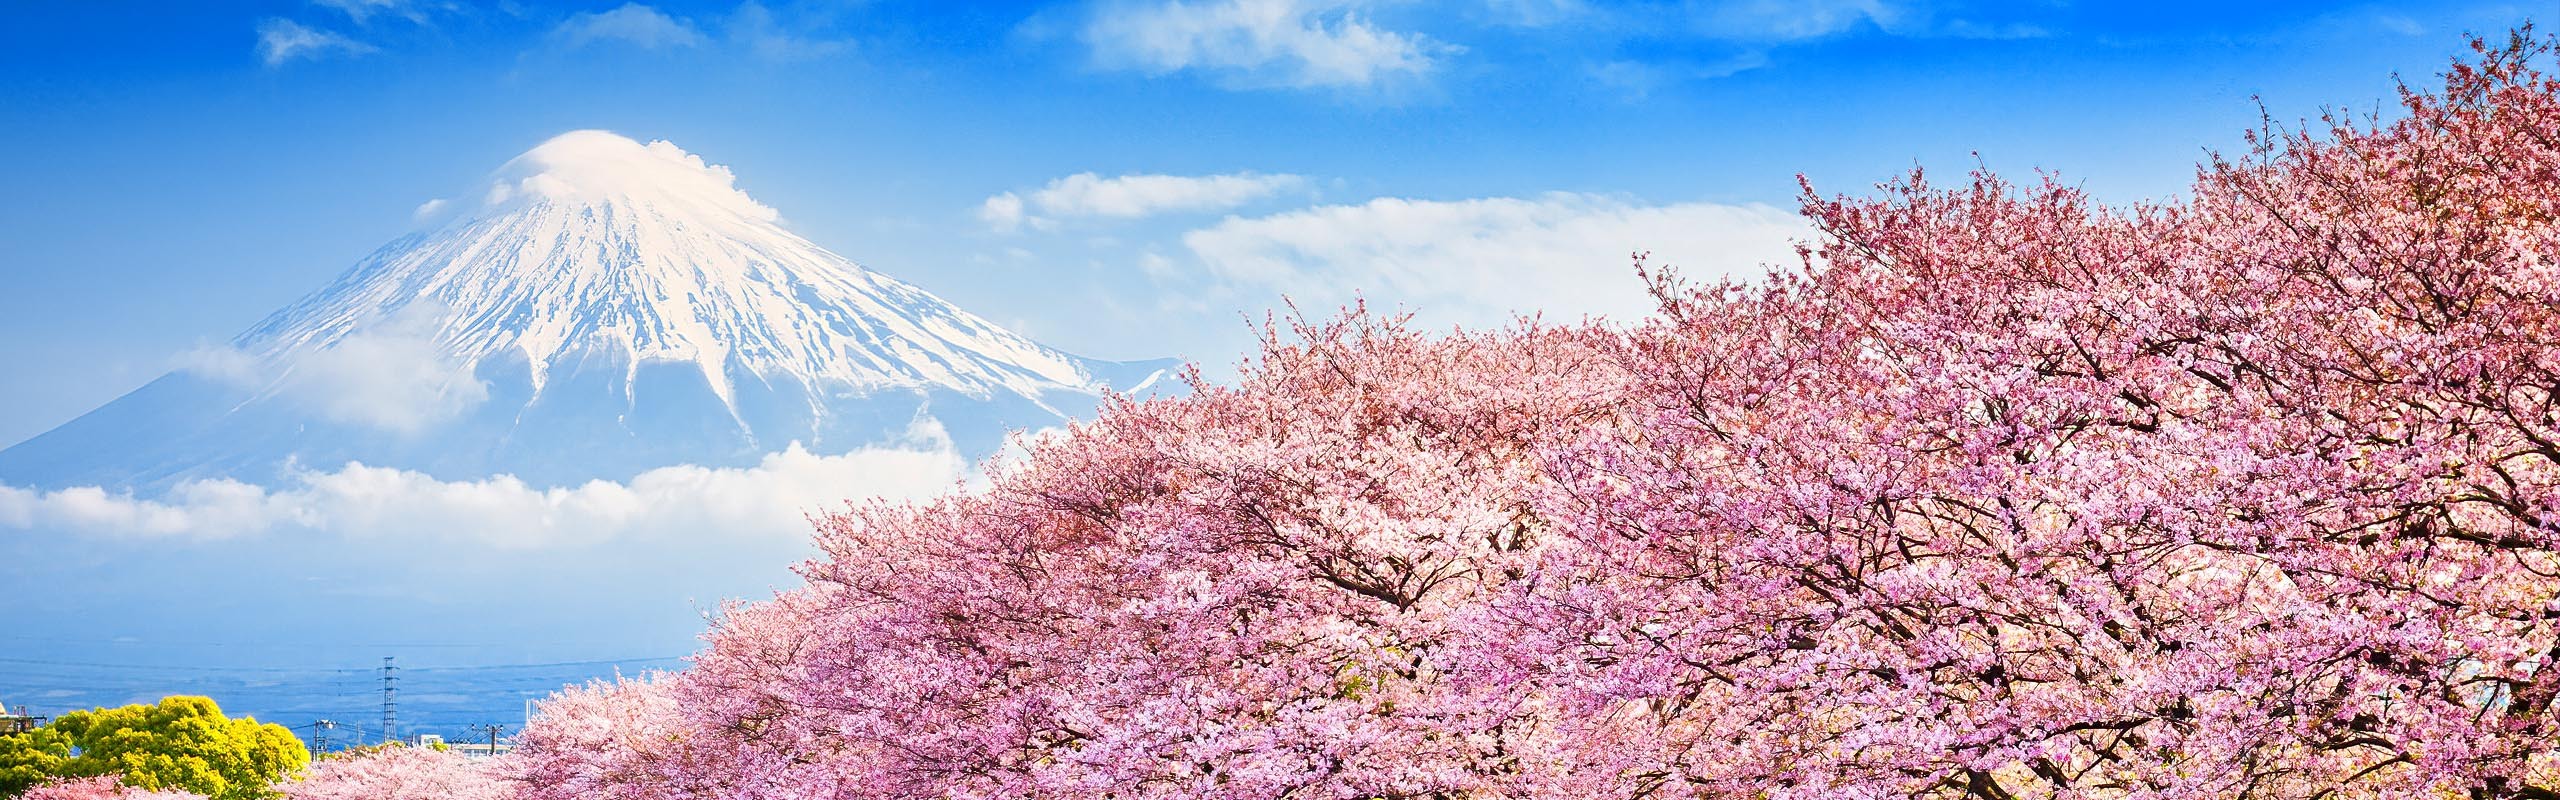 10-Day Japan Cherry Blossom Spring 2023 Mini-Group Tour